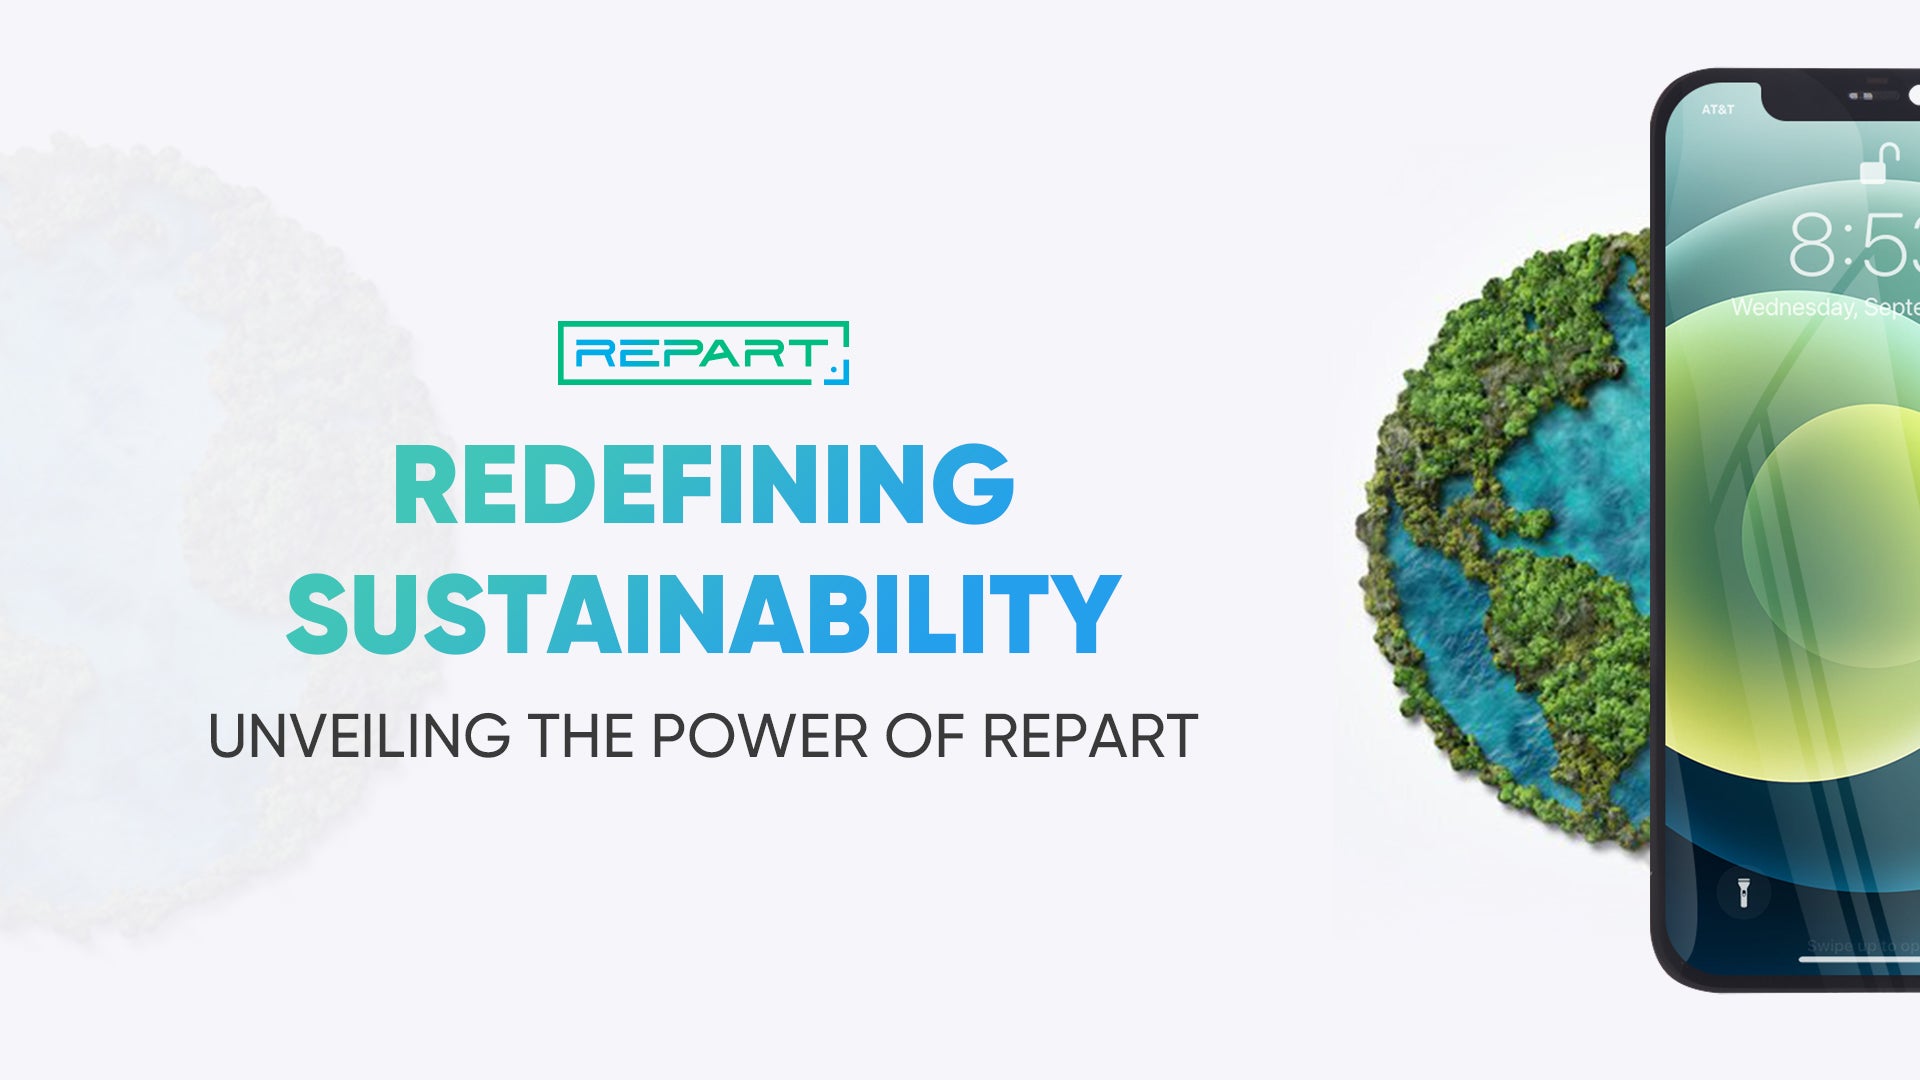 Unveiling Sustainability: the Power of REPART